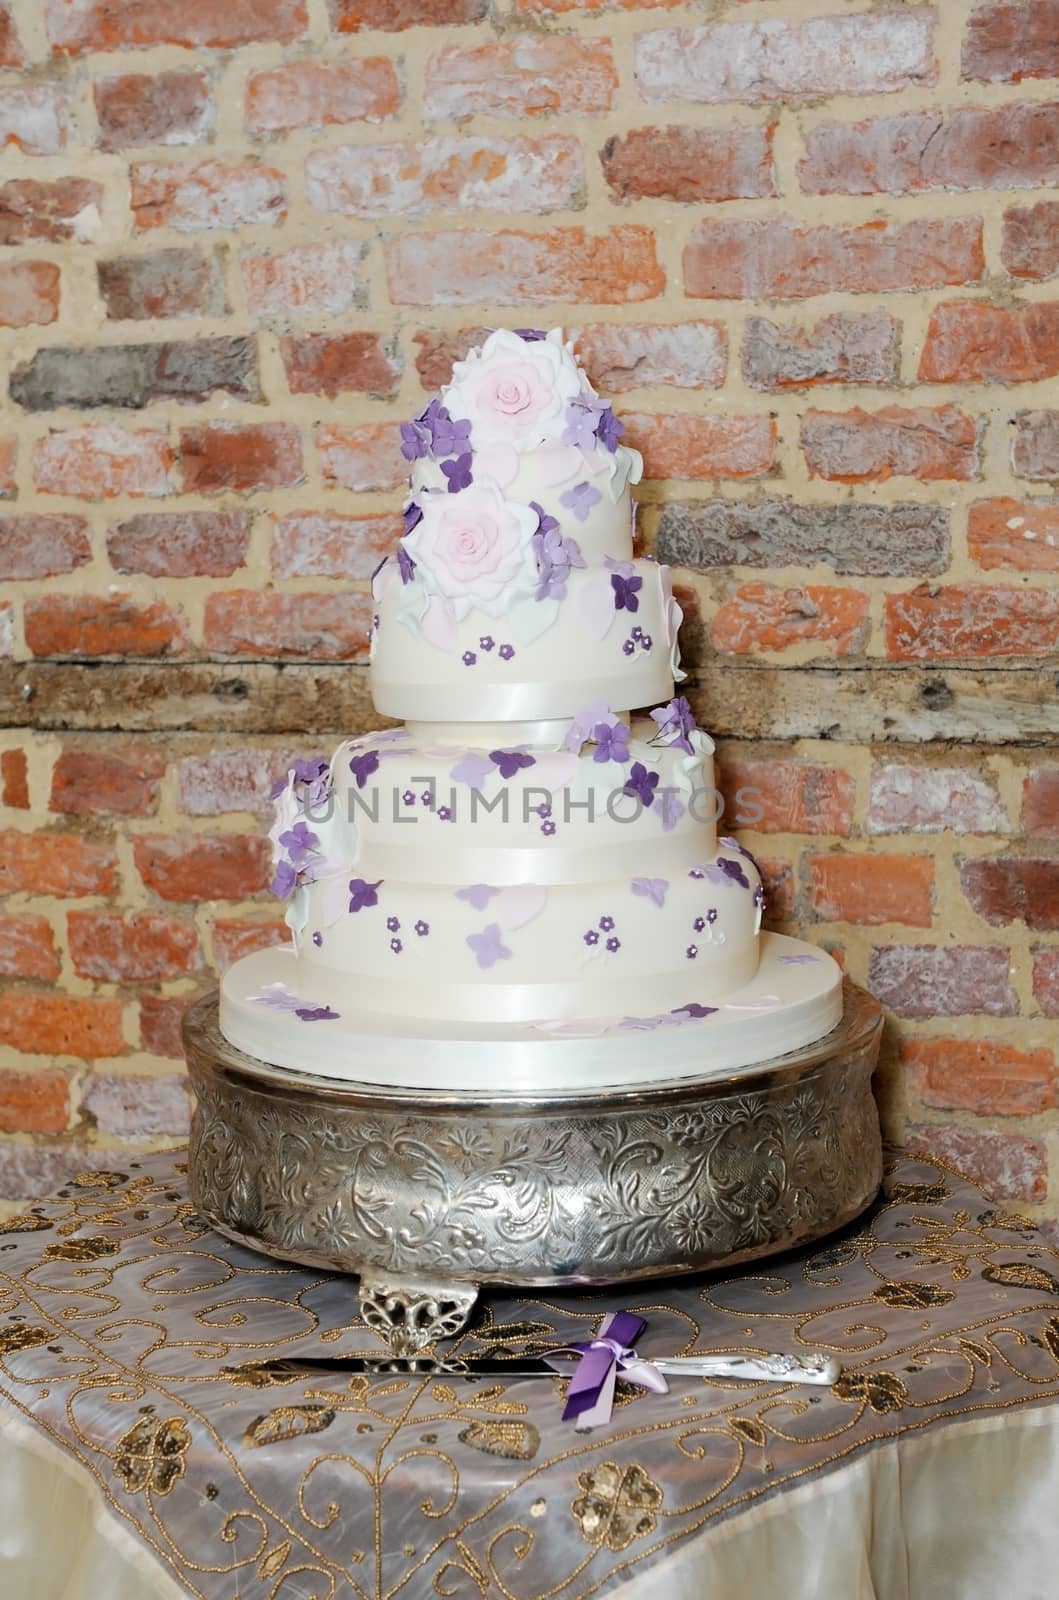 Wedding cake at reception with silver knife showing purple and pink decoration